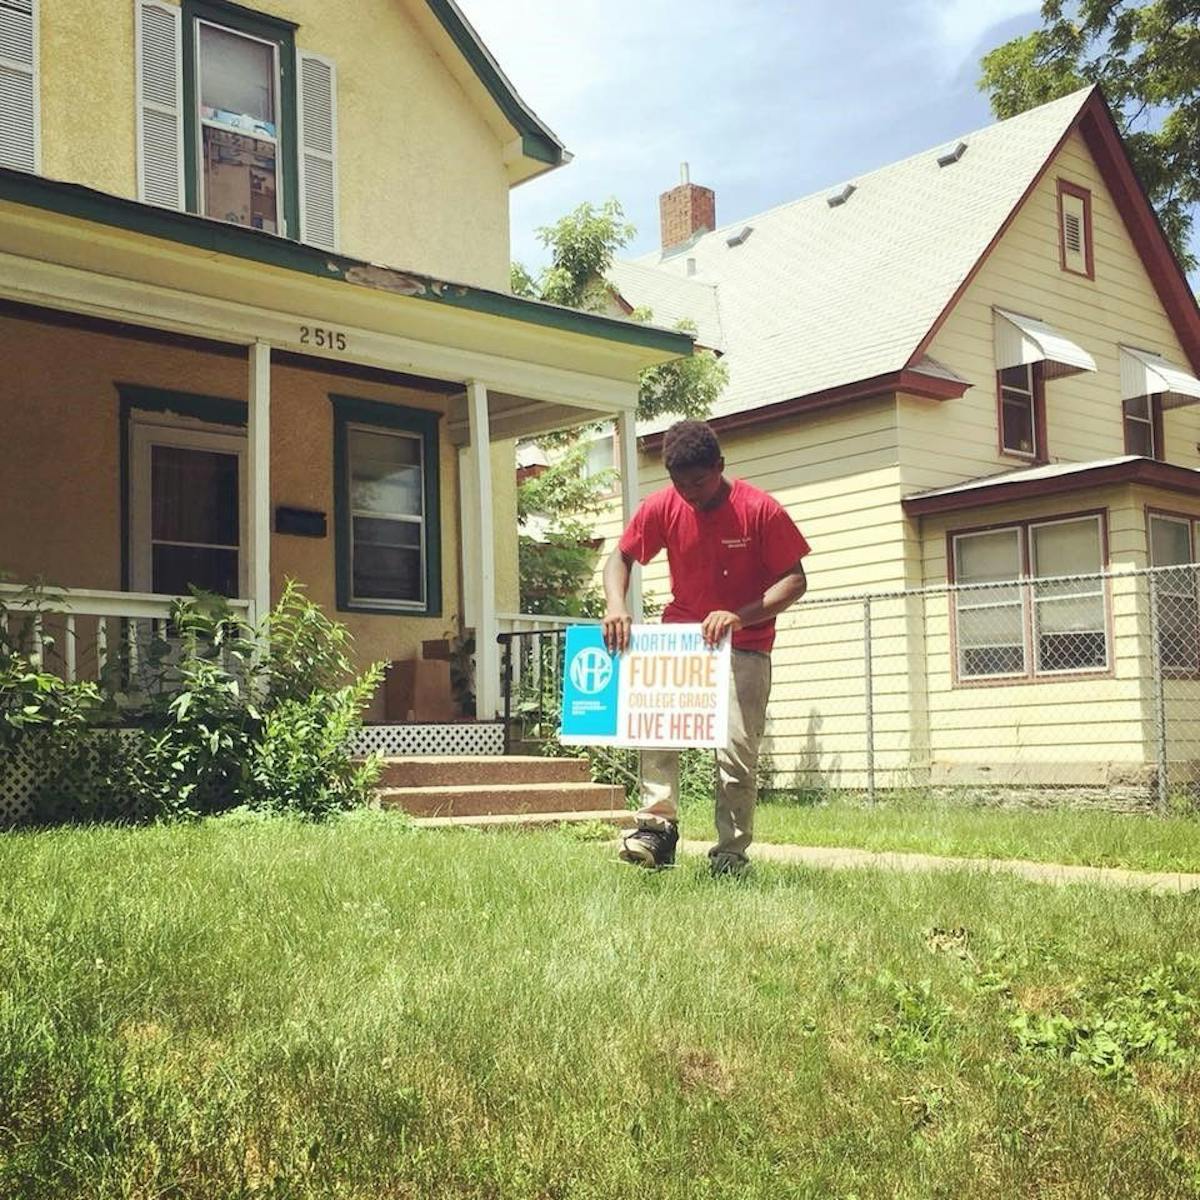 A young scholar places a sign in his yard of a North Minneapolis home. Five hundred "Future College Grads Live Here" signs went up in the neighborhood